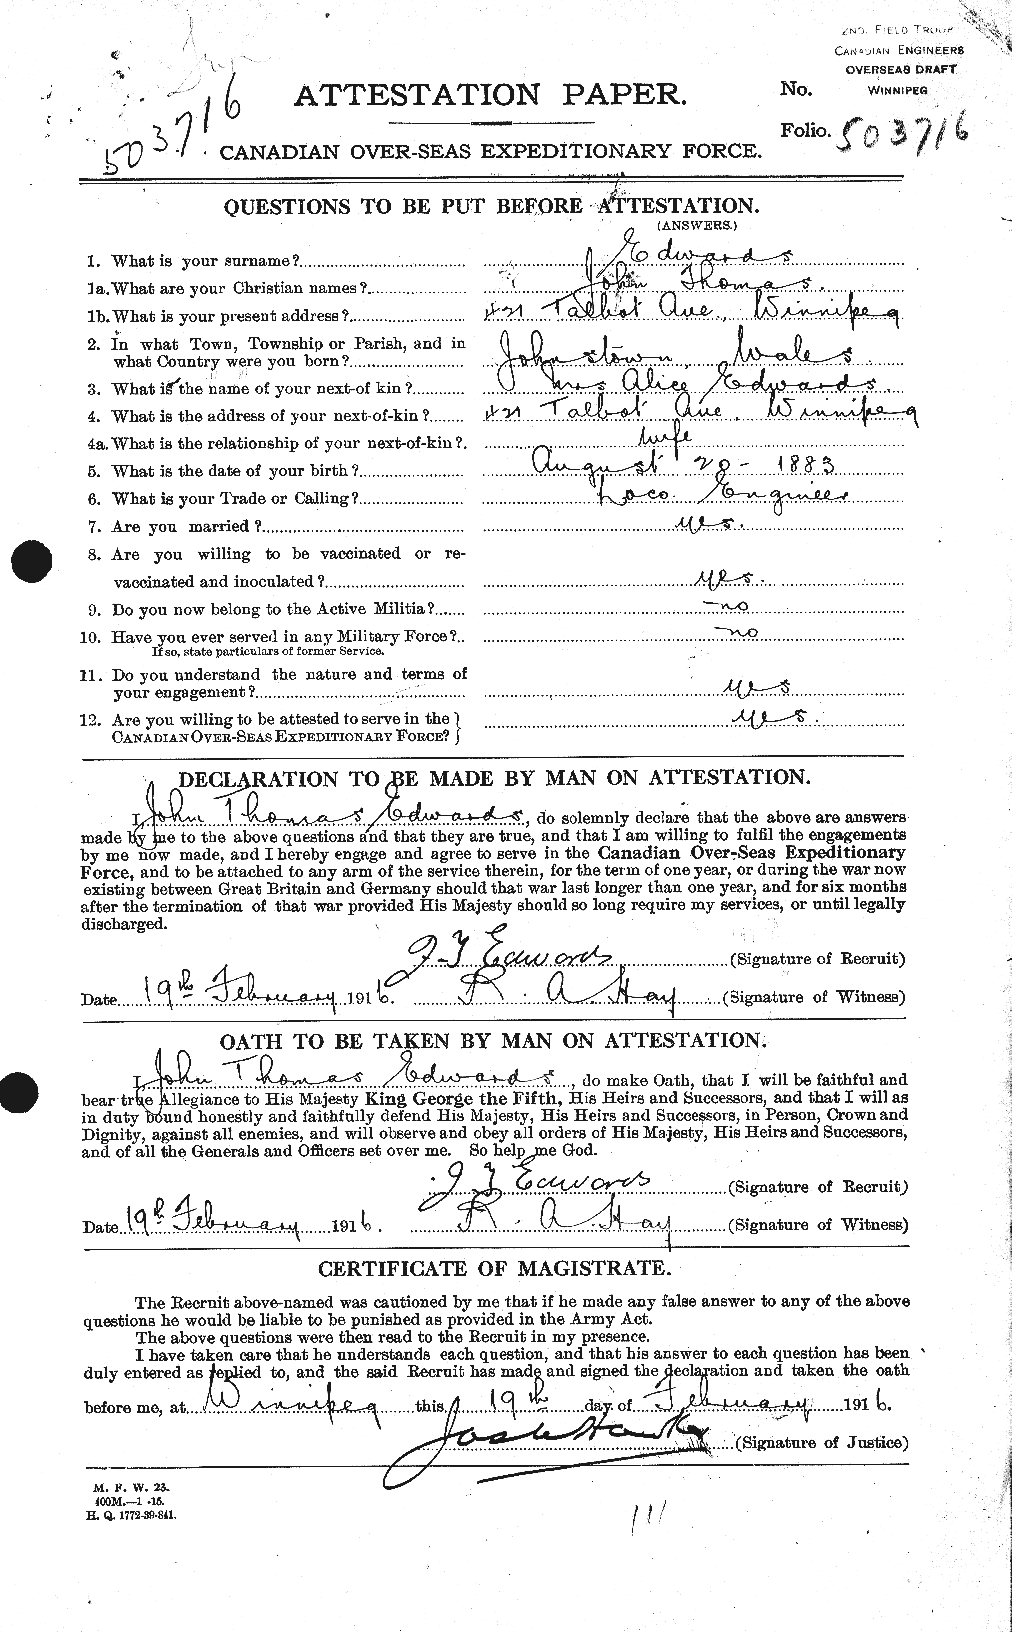 Personnel Records of the First World War - CEF 310156a